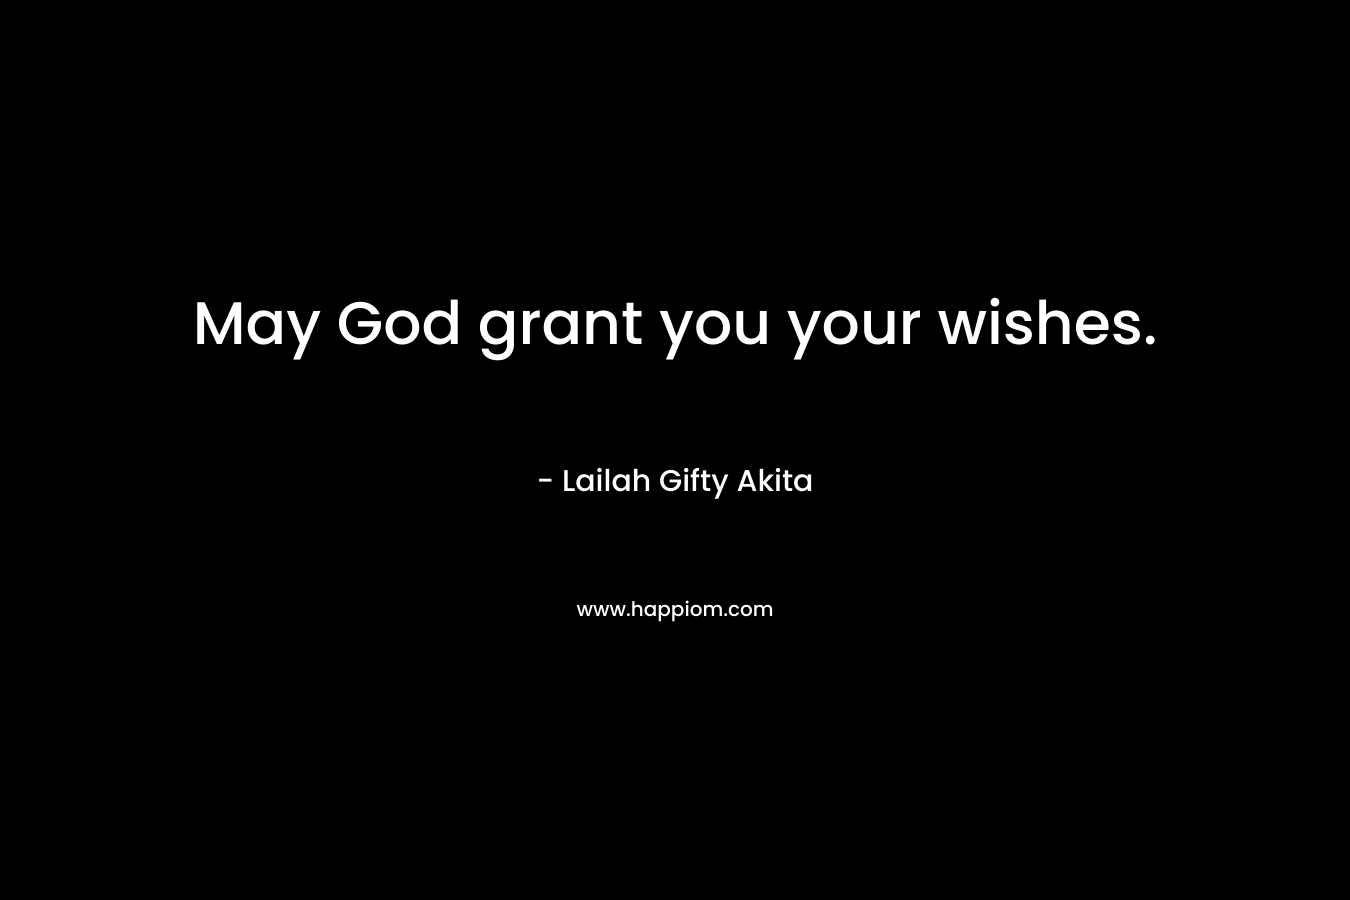 May God grant you your wishes.